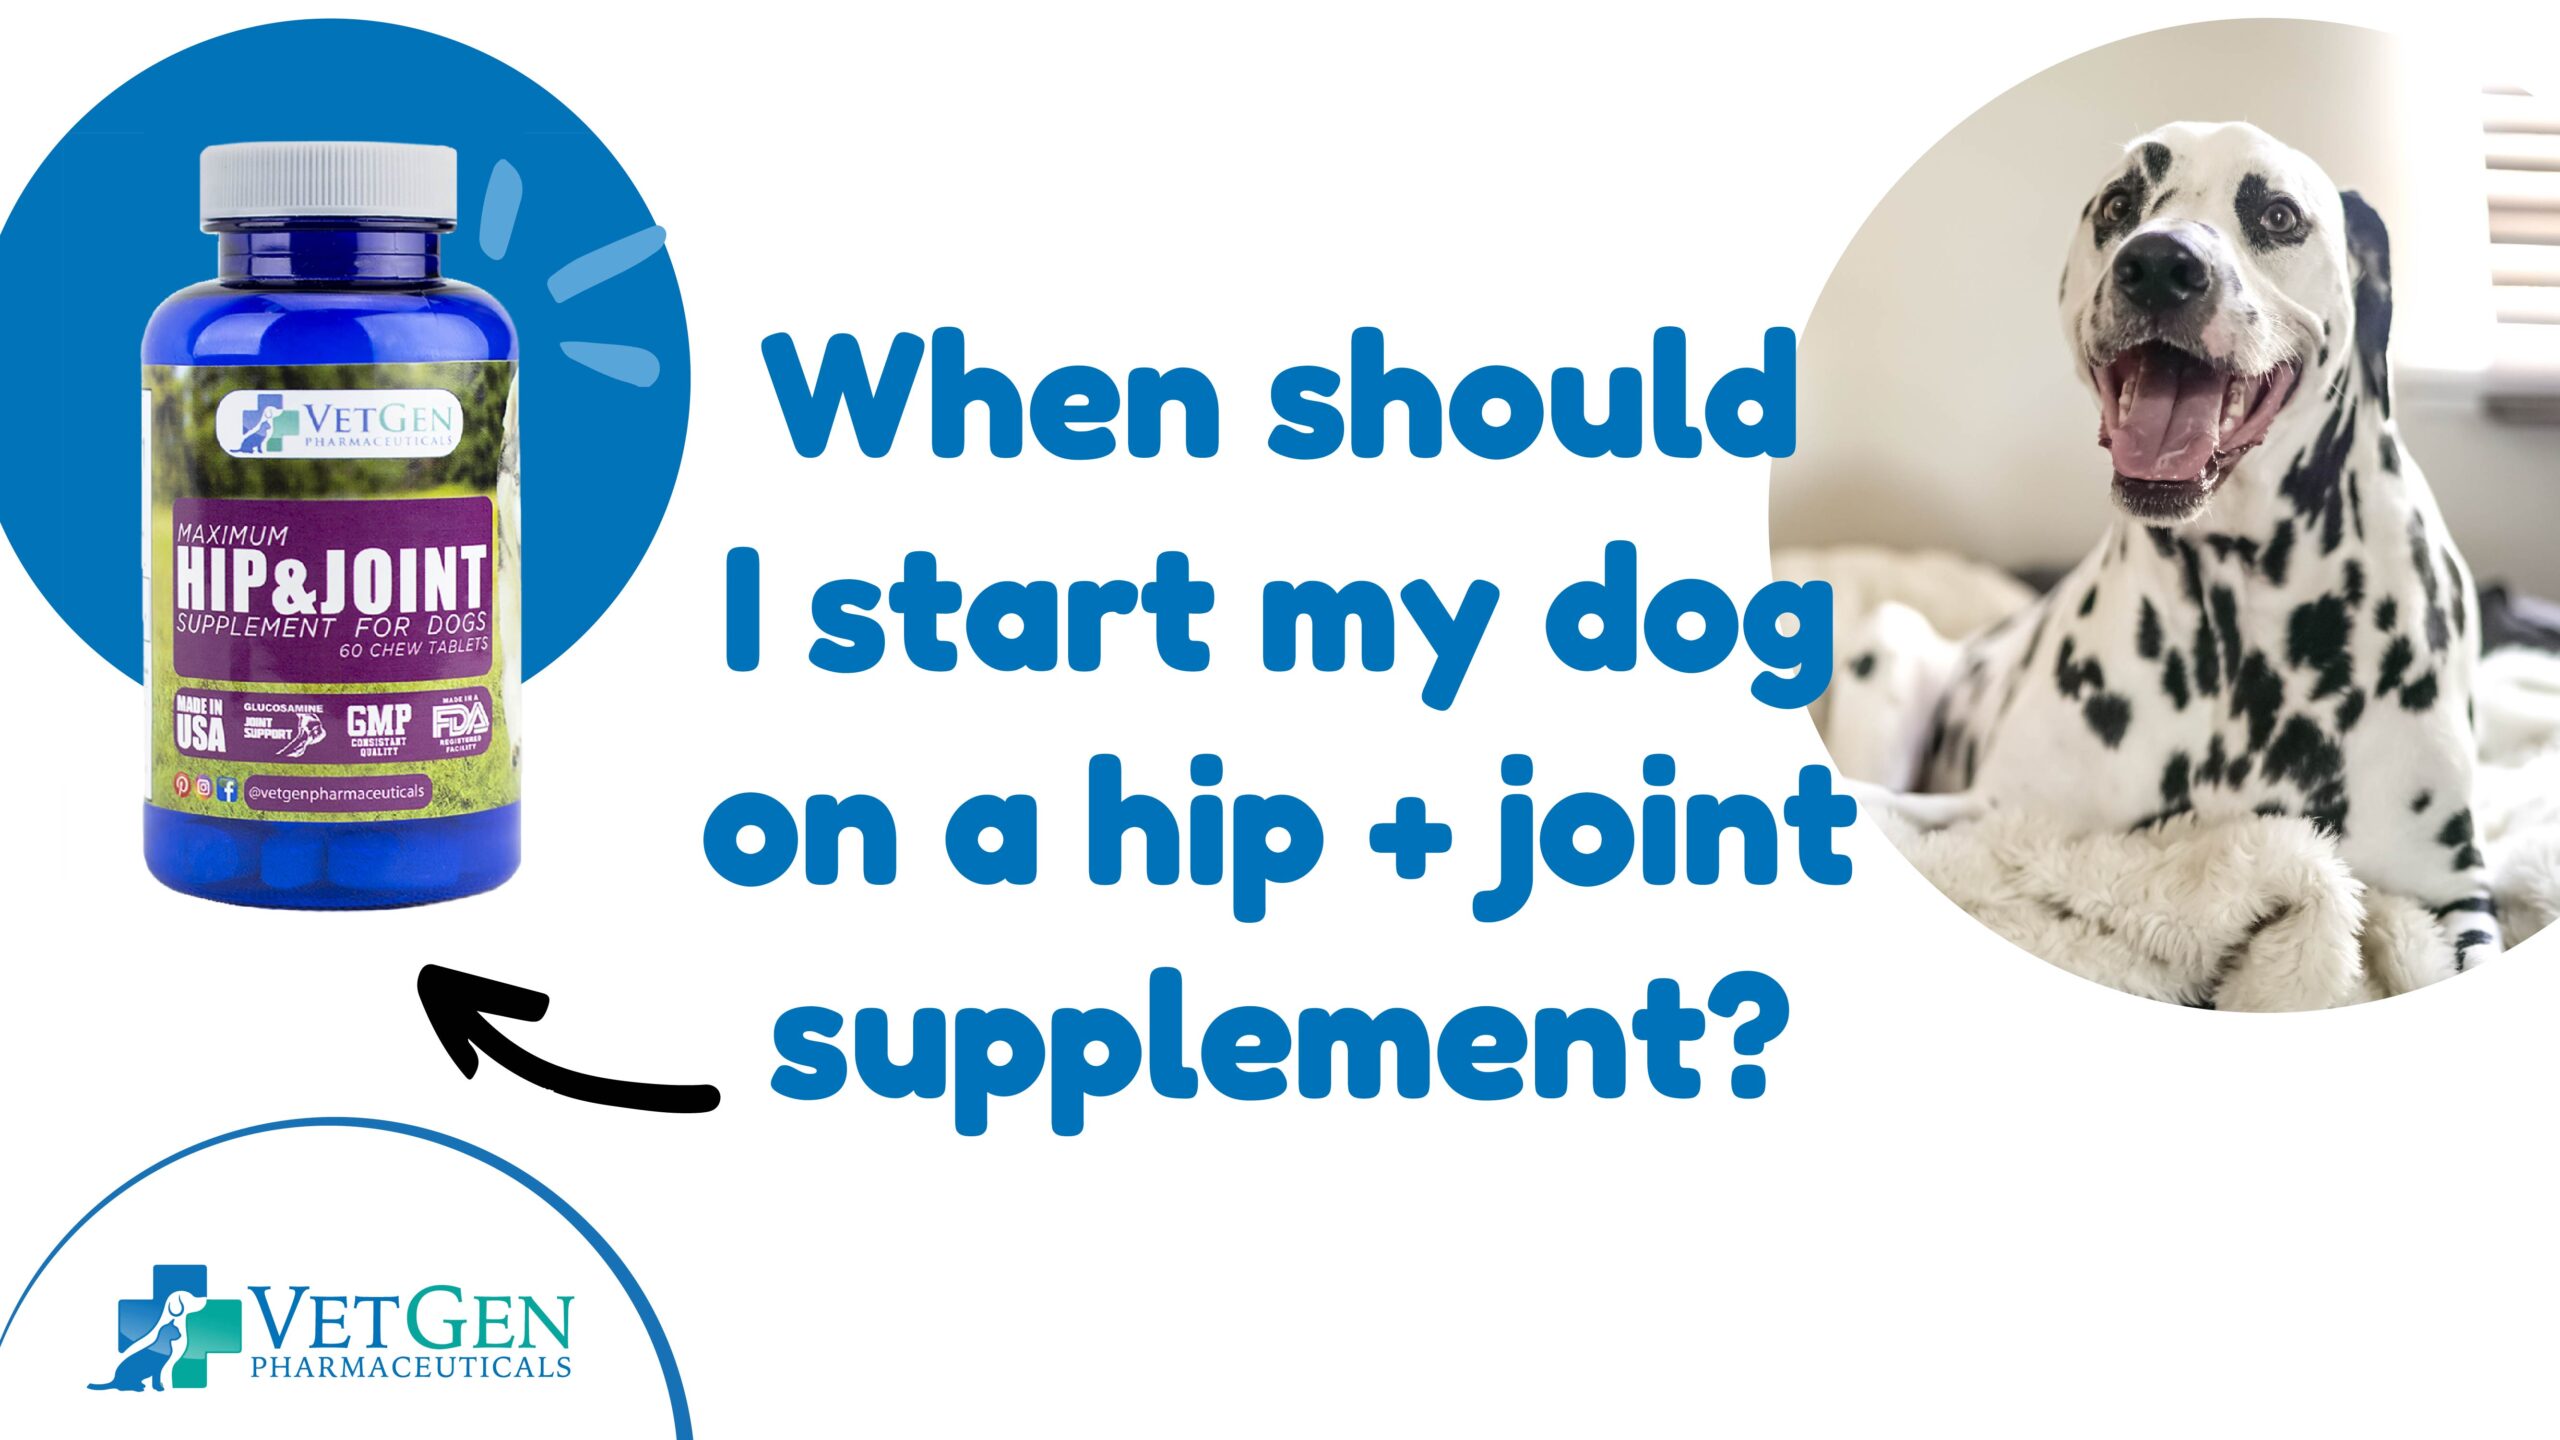 When should-I start my dog on a hip joint supplement